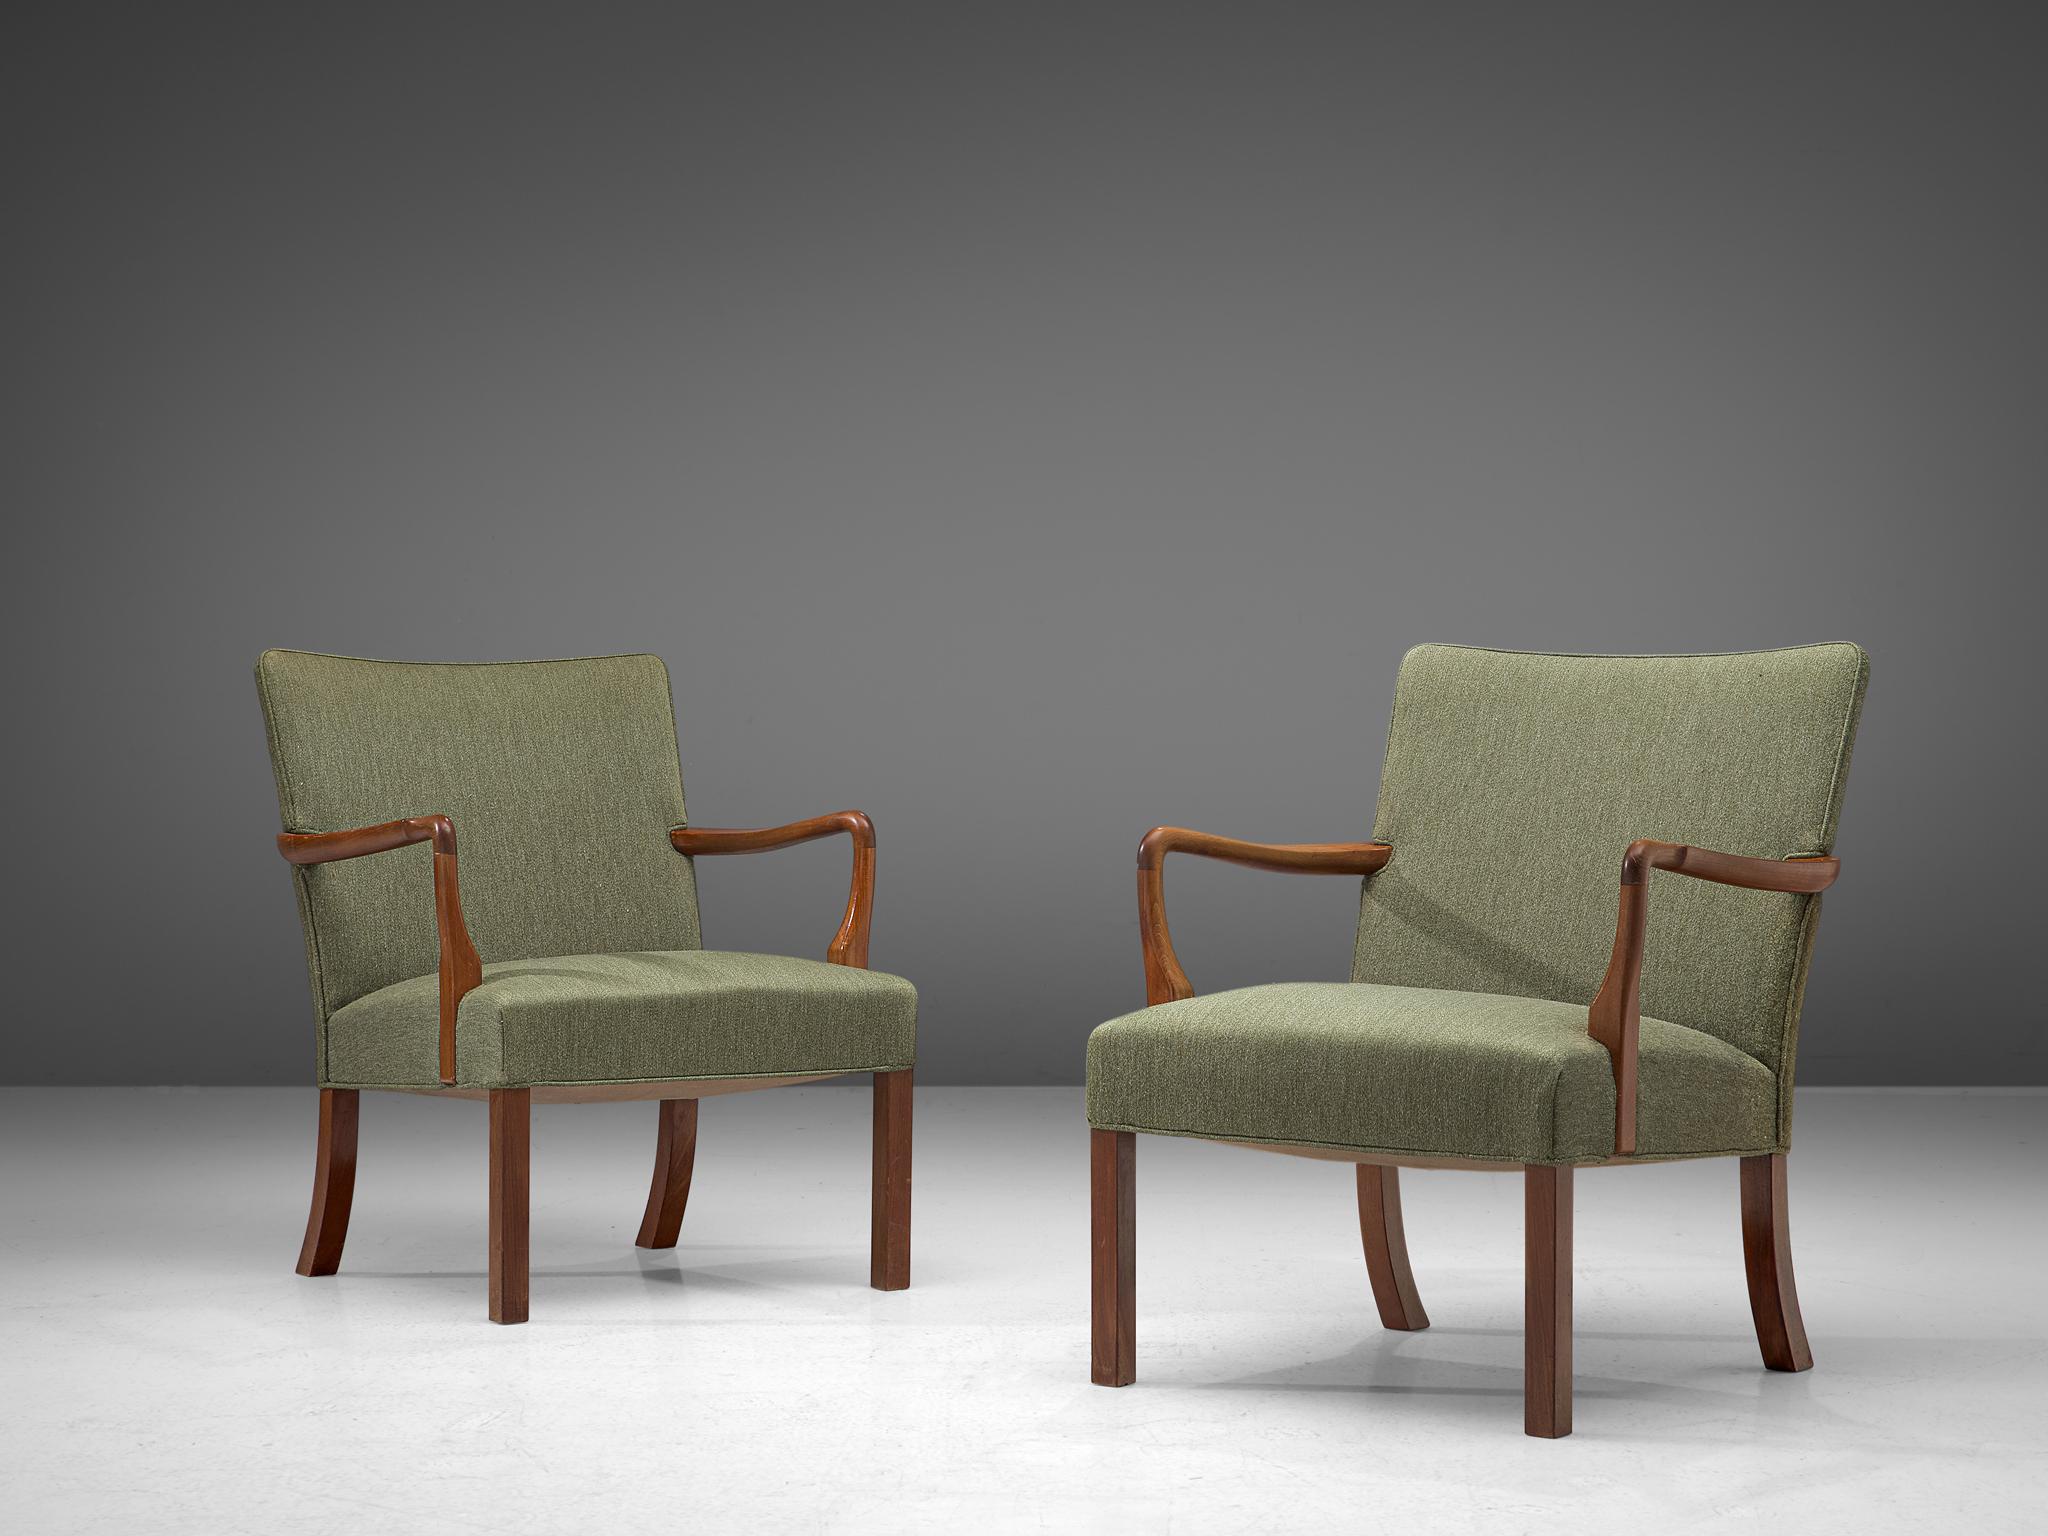 Jacob Kjær, pair of armchairs, mahogany and fabric, Denmark, 1940s.

Stunning pair of armchairs by master cabinetmaker Jacob Kjaer. Characterized by simplicity, the chairs are executed in the finest materials, such as mahogany. Kjaer was inspired by